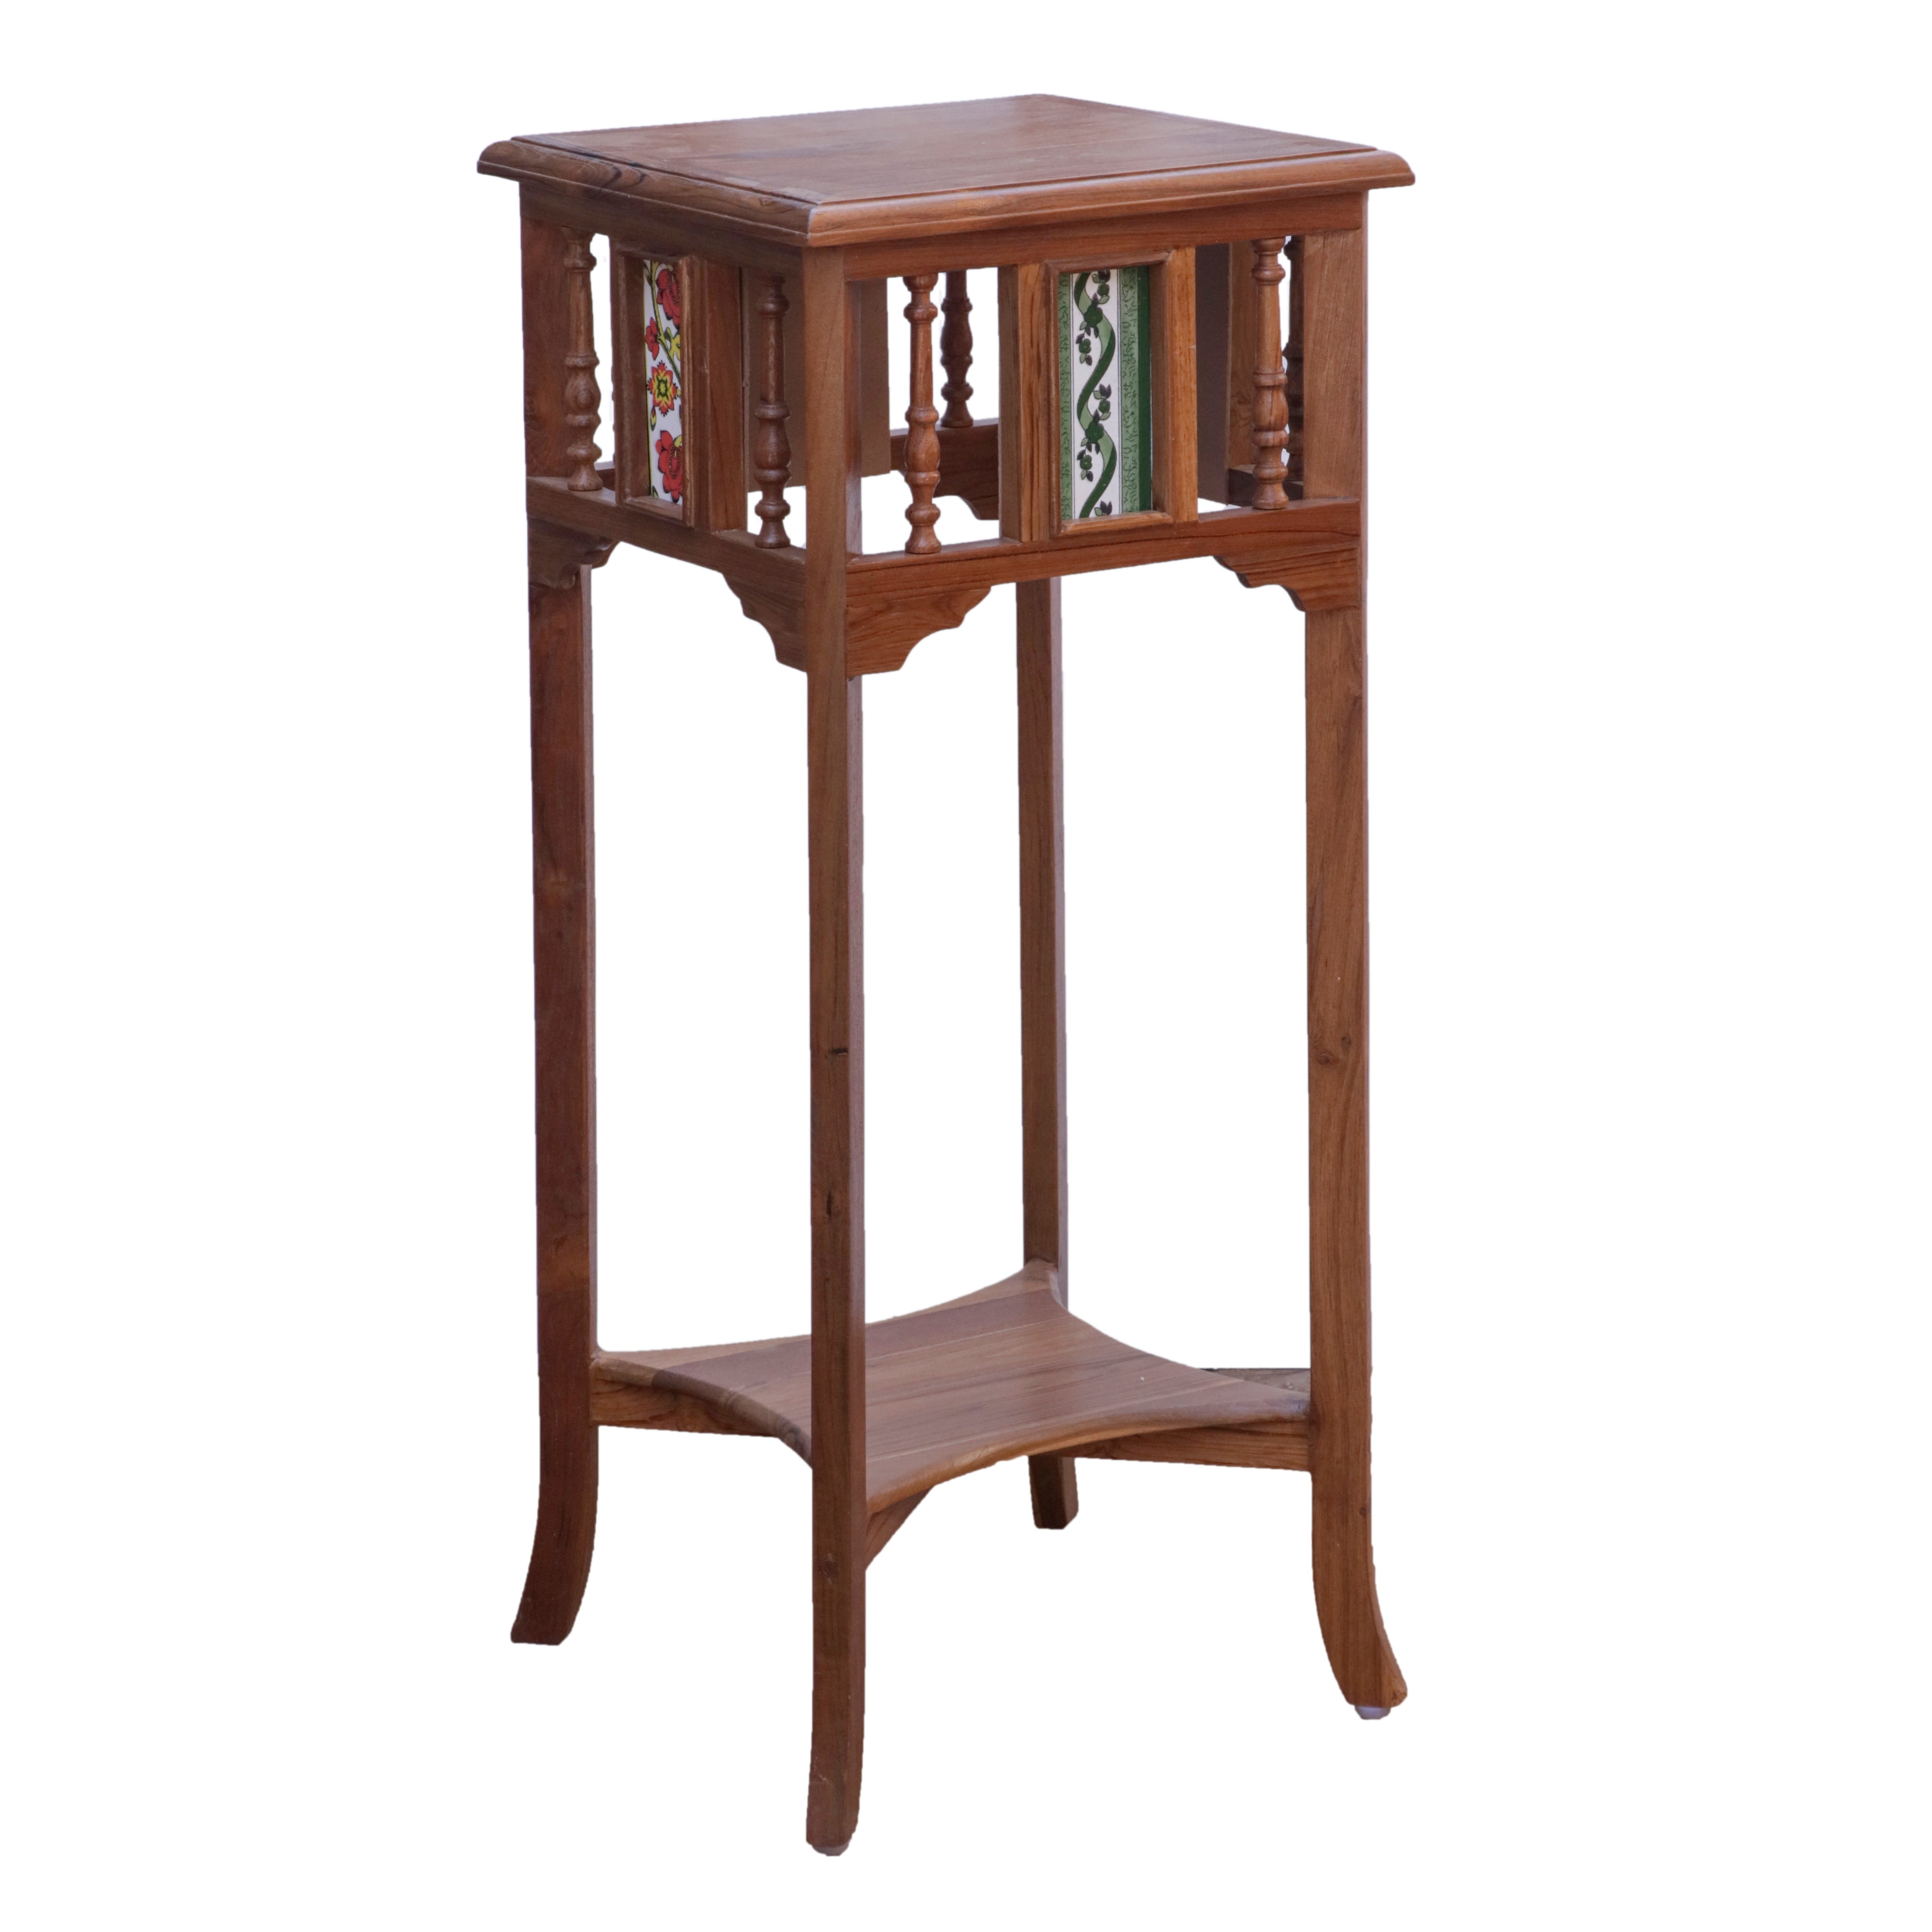 Wide-end Tiled Table End Table